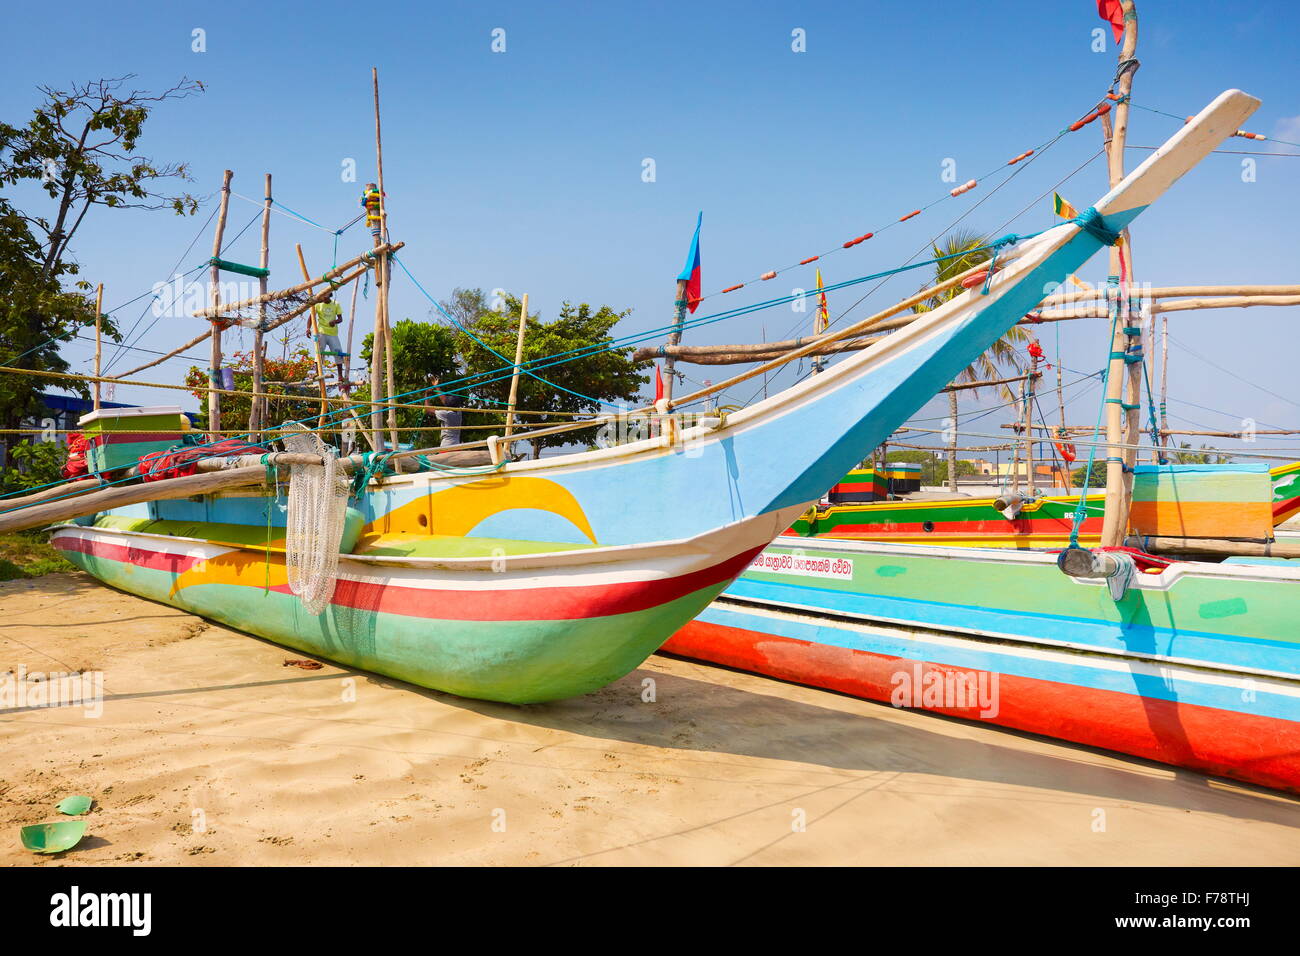 Sri Lanka - Galle, traditional wooden painted fishing boats in the port Stock Photo